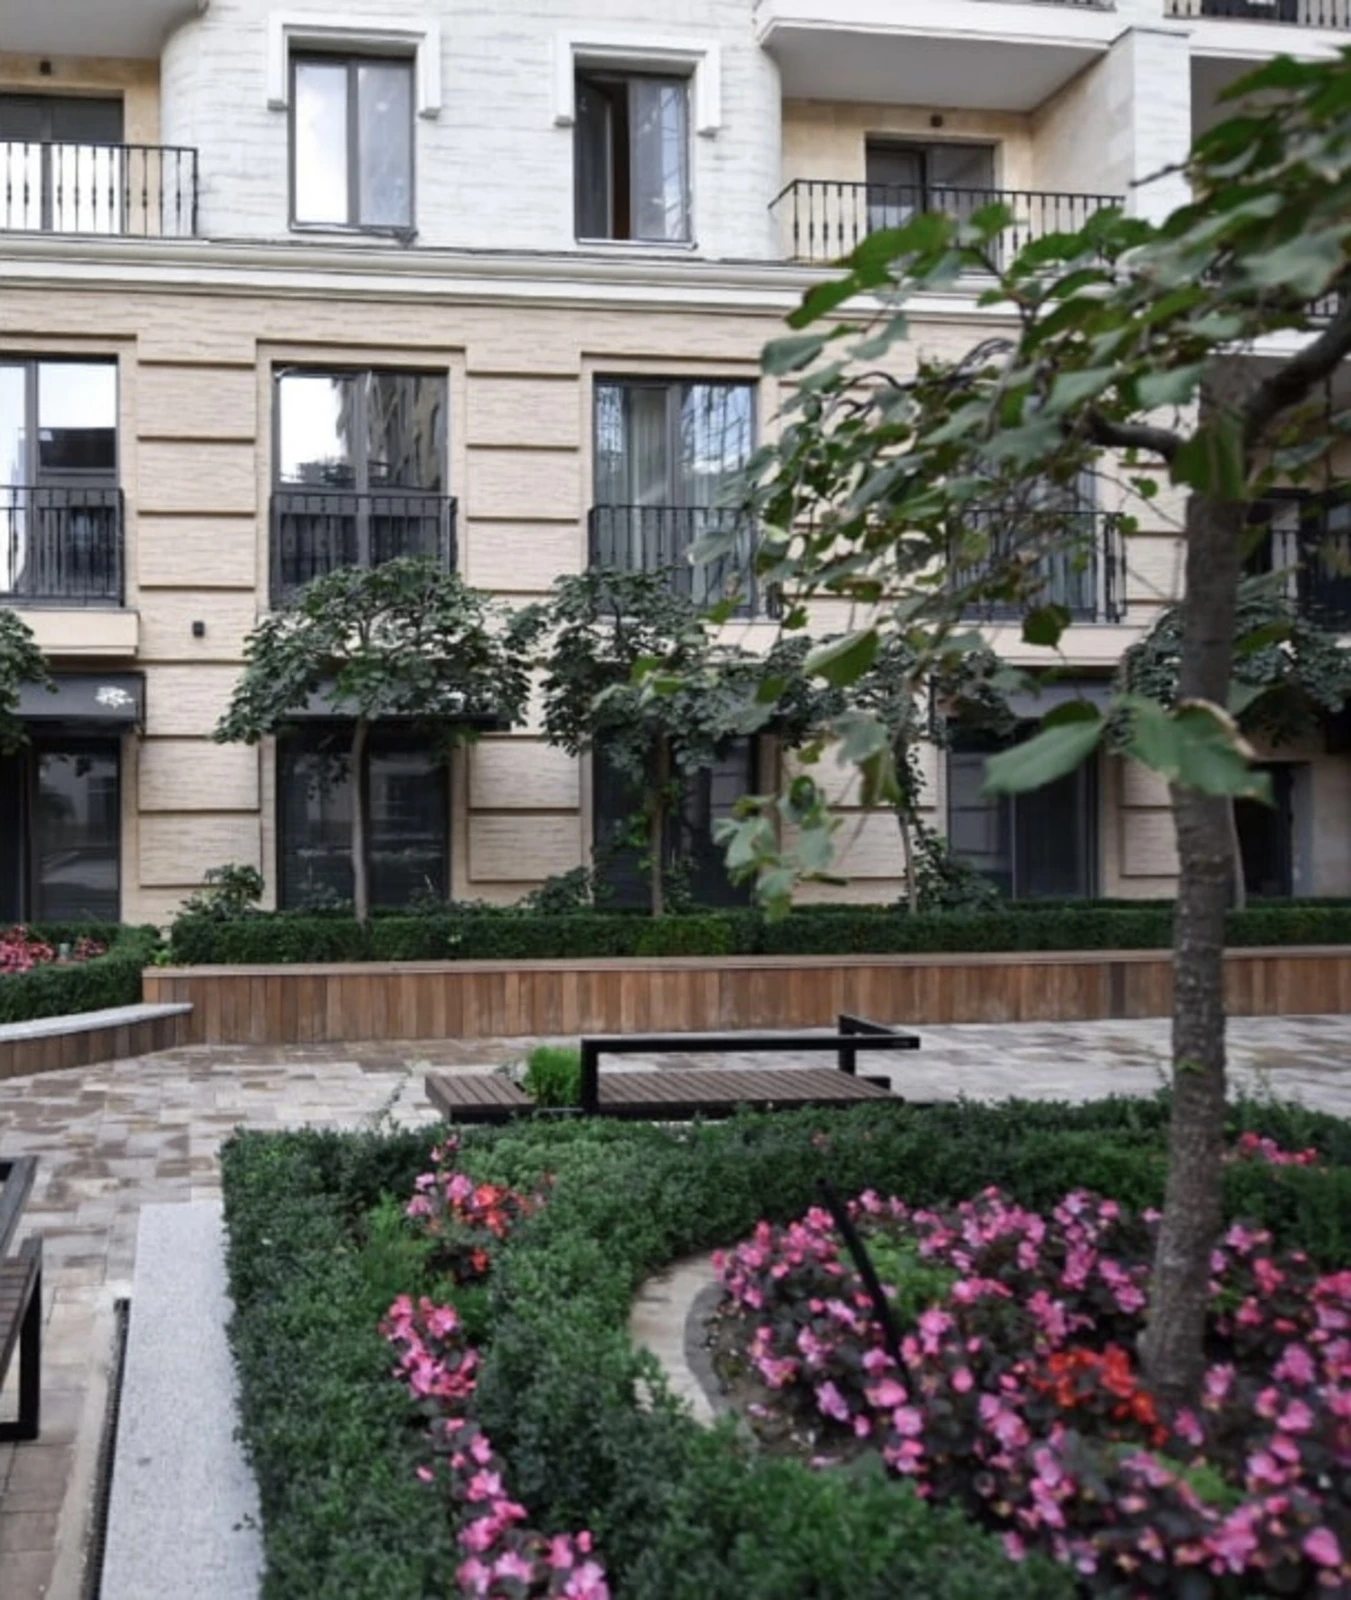 Real estate for sale for commercial purposes. 235 m², 1st floor/14 floors. Frantsuzskyy b-r, Odesa. 